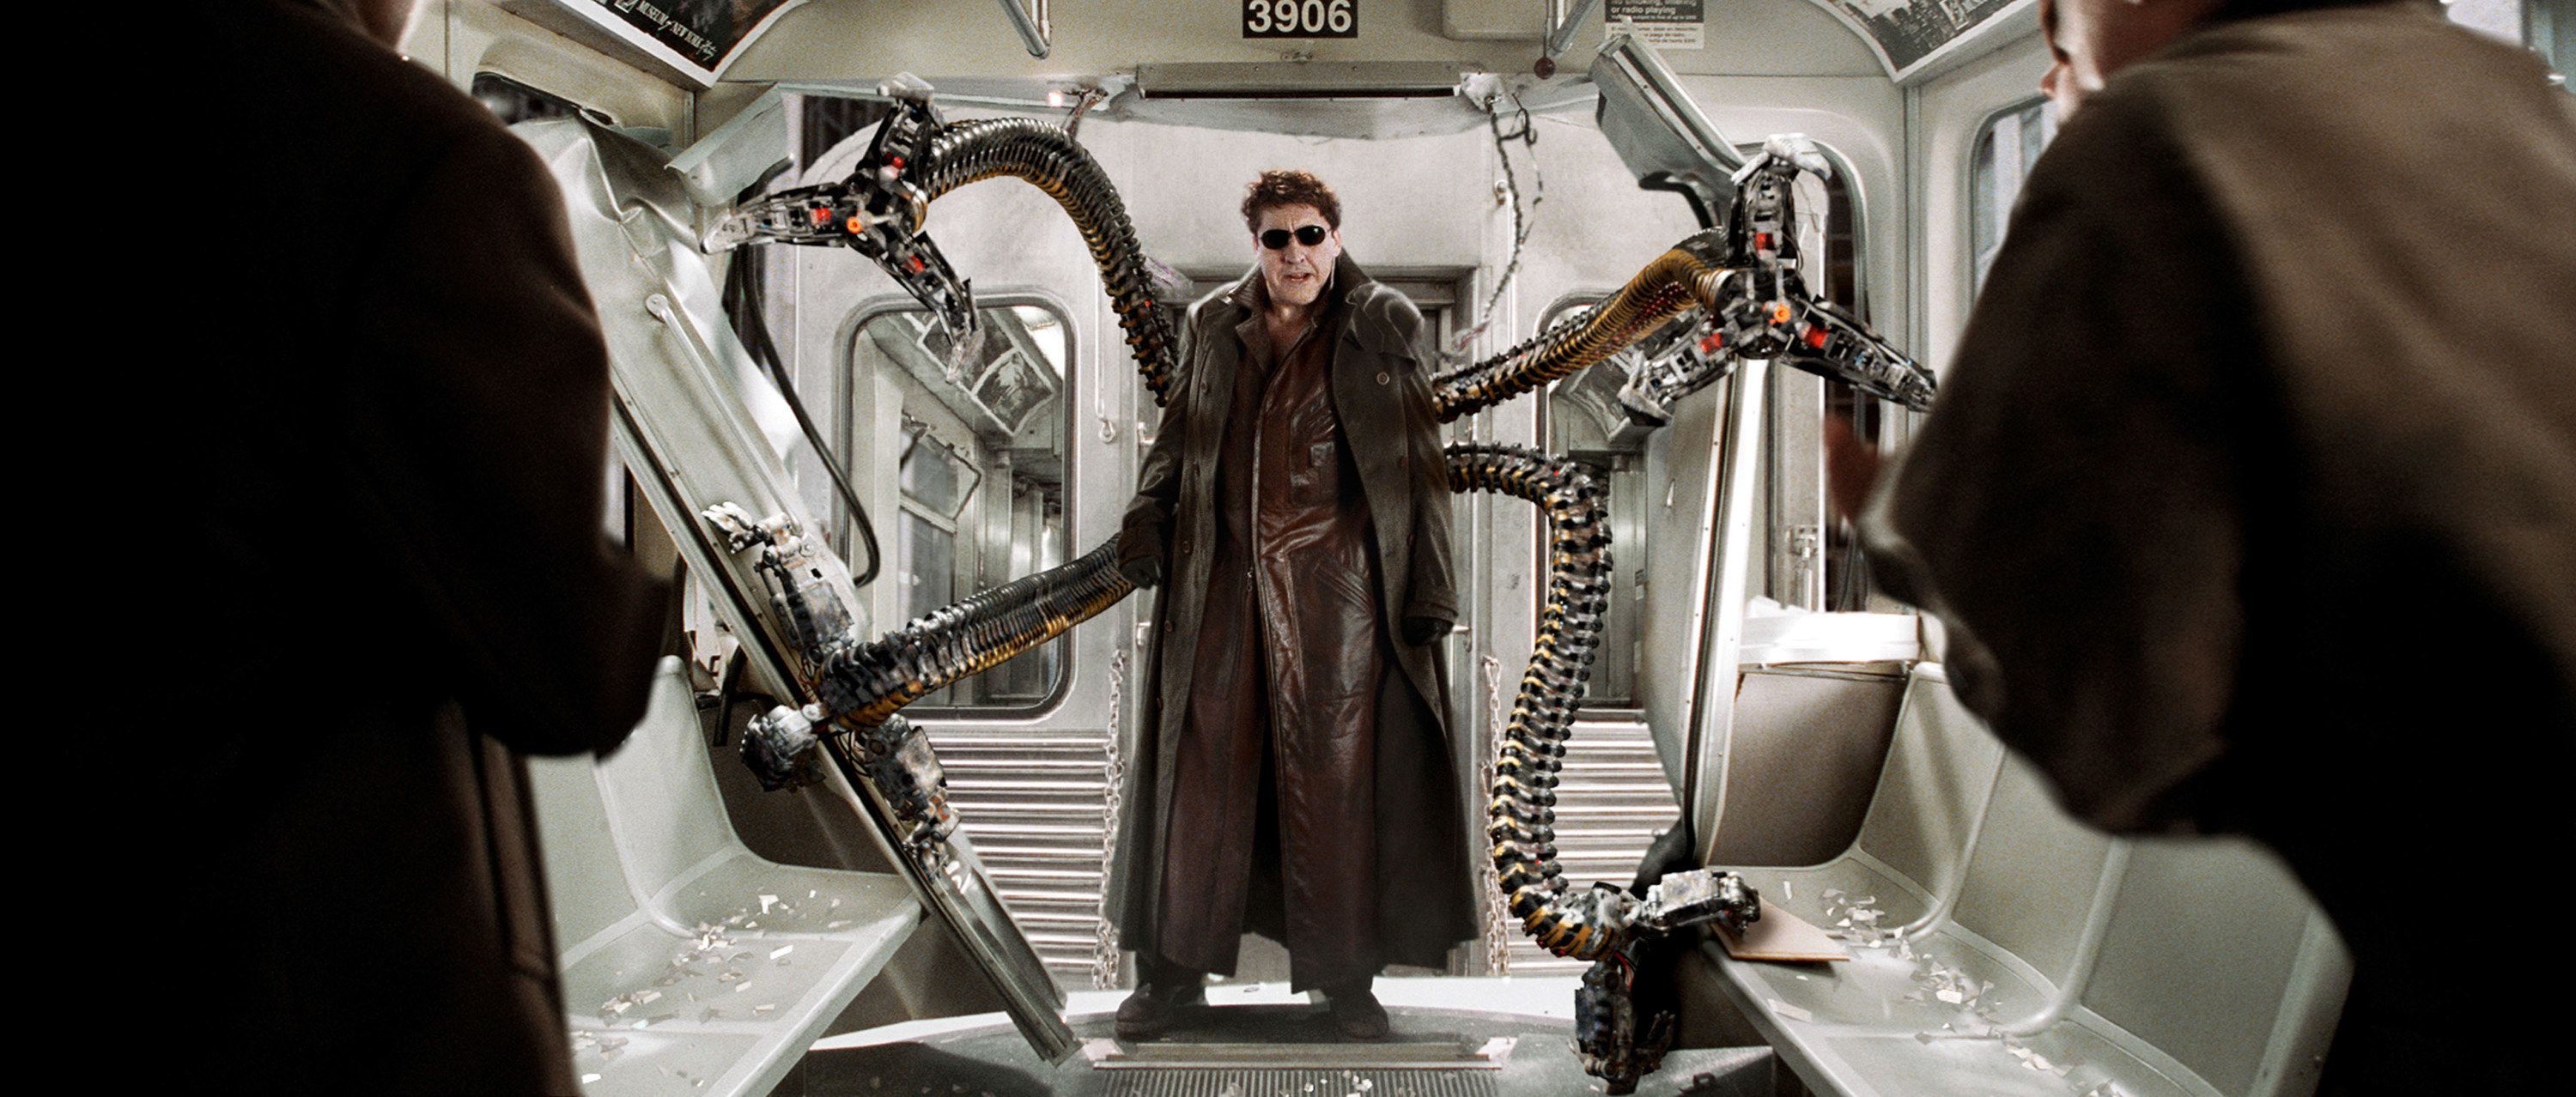 Alfred Molina stands in the back of a train with his tentacles reaching and grasping as Doc Ock in Spider-Man 2